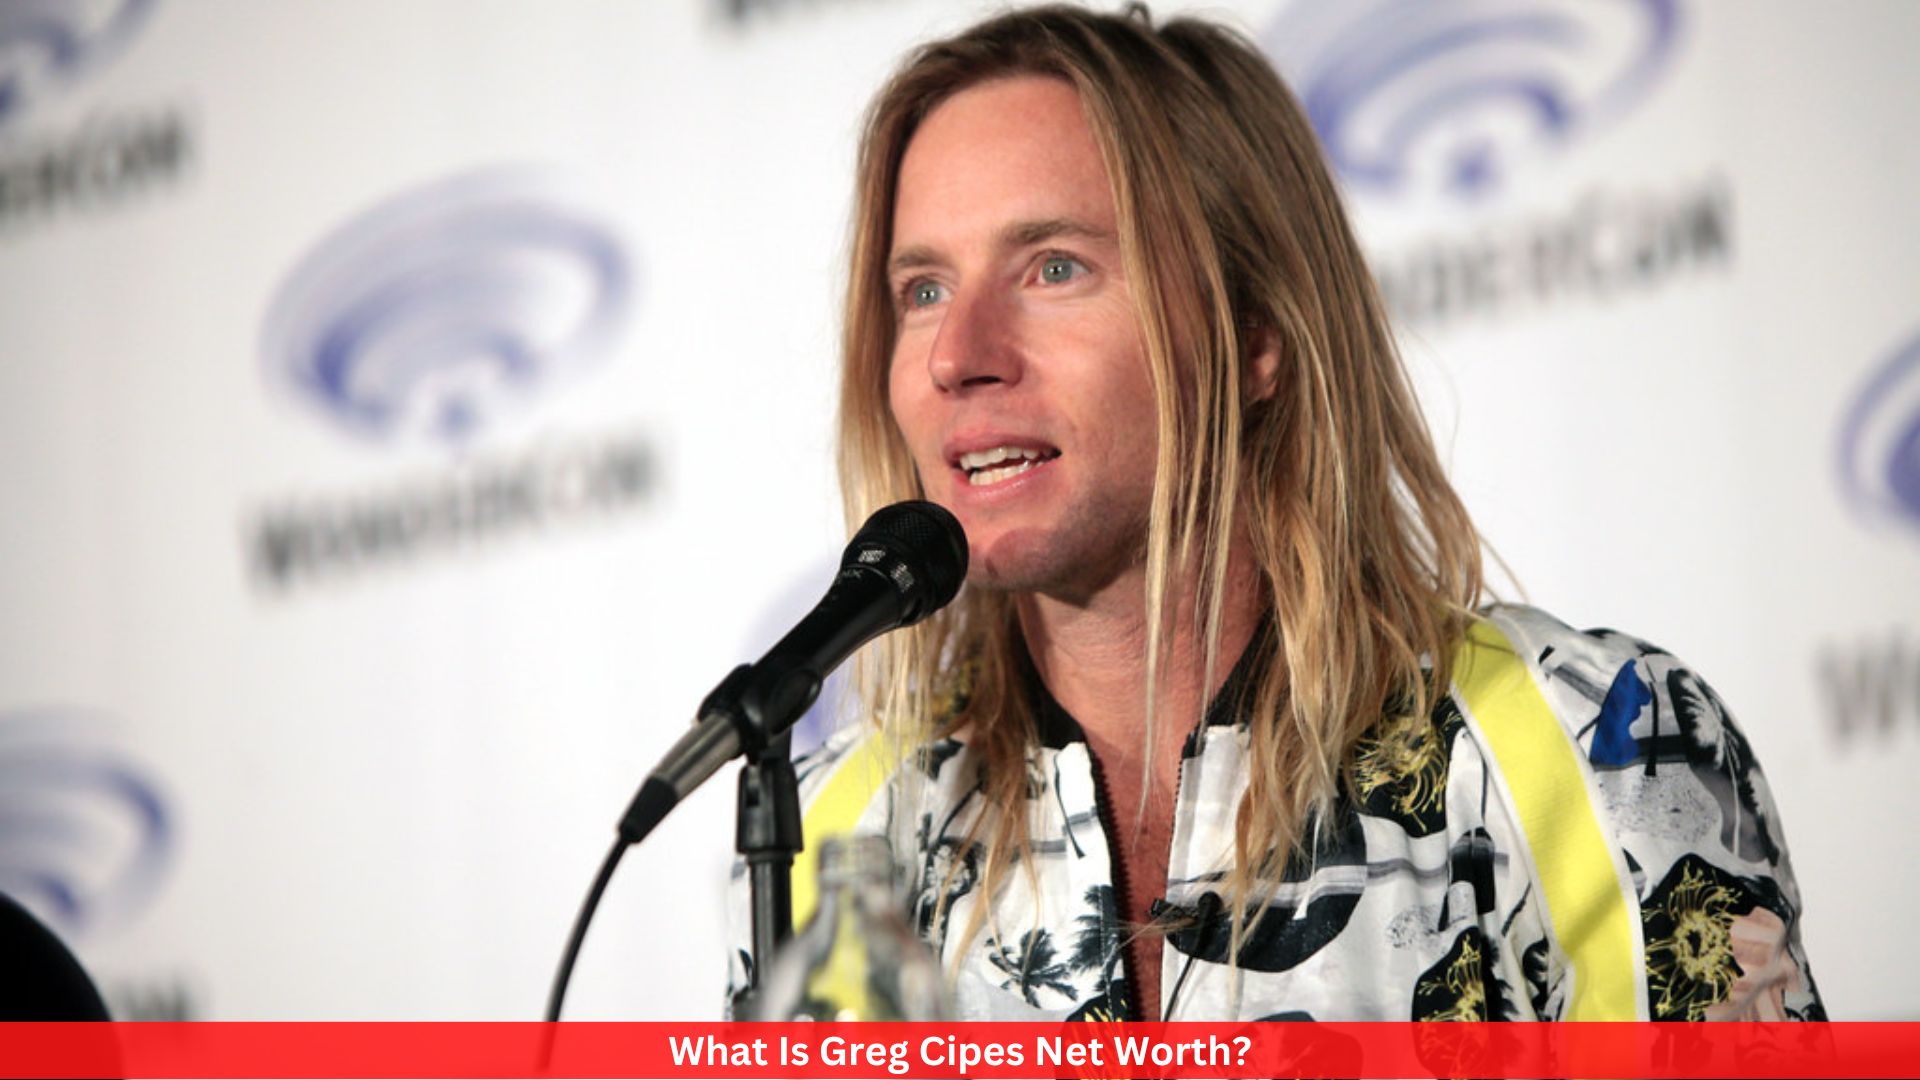 What Is Greg Cipes Net Worth?